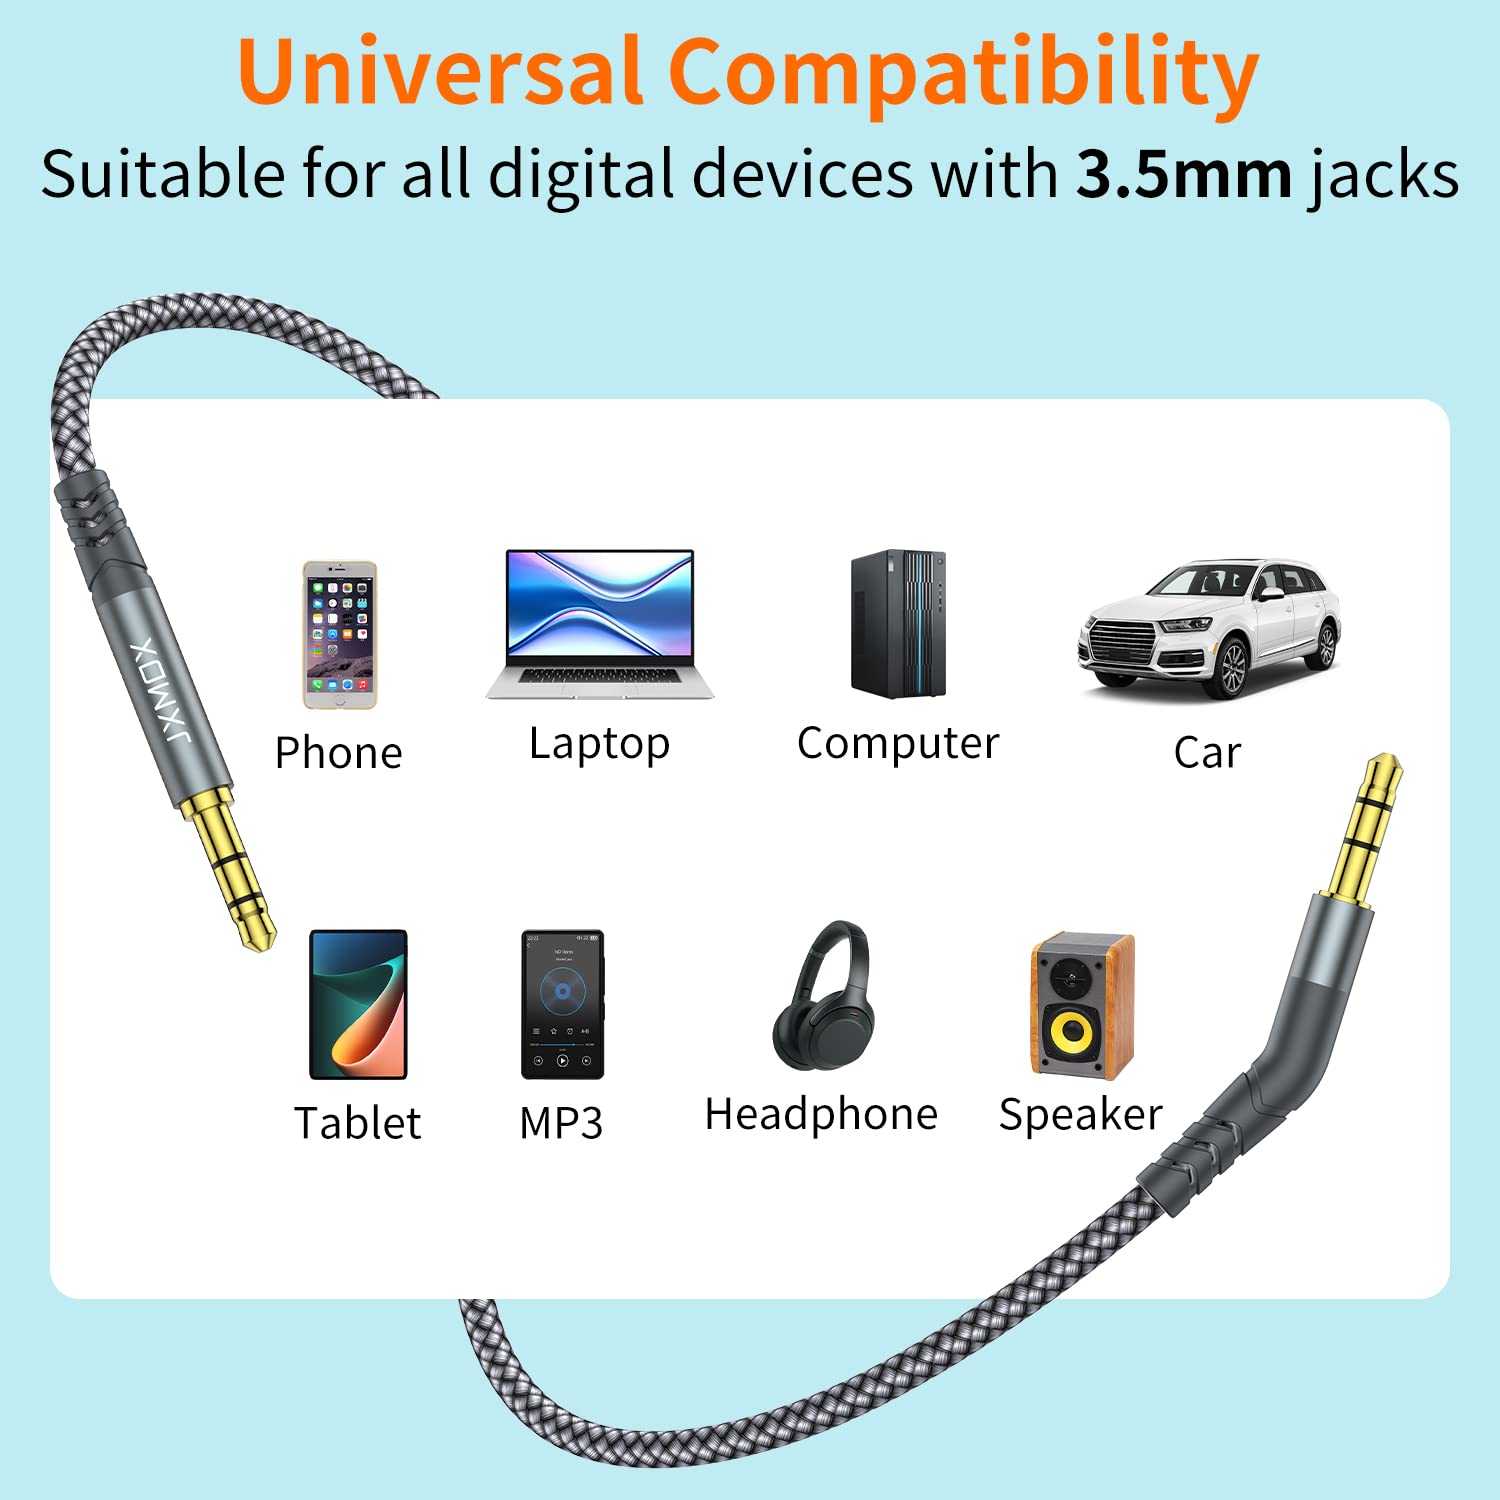 JXMOX 3.5mm Aux Cable (4ft/1.2m), 45 Degree Audio Auxiliary Input Adapter Male to Male 1/8 AUX Cord for Headphones, Car, Home Stereos, Speaker, iPhone, iPad, iPod, Echo & More – Grey